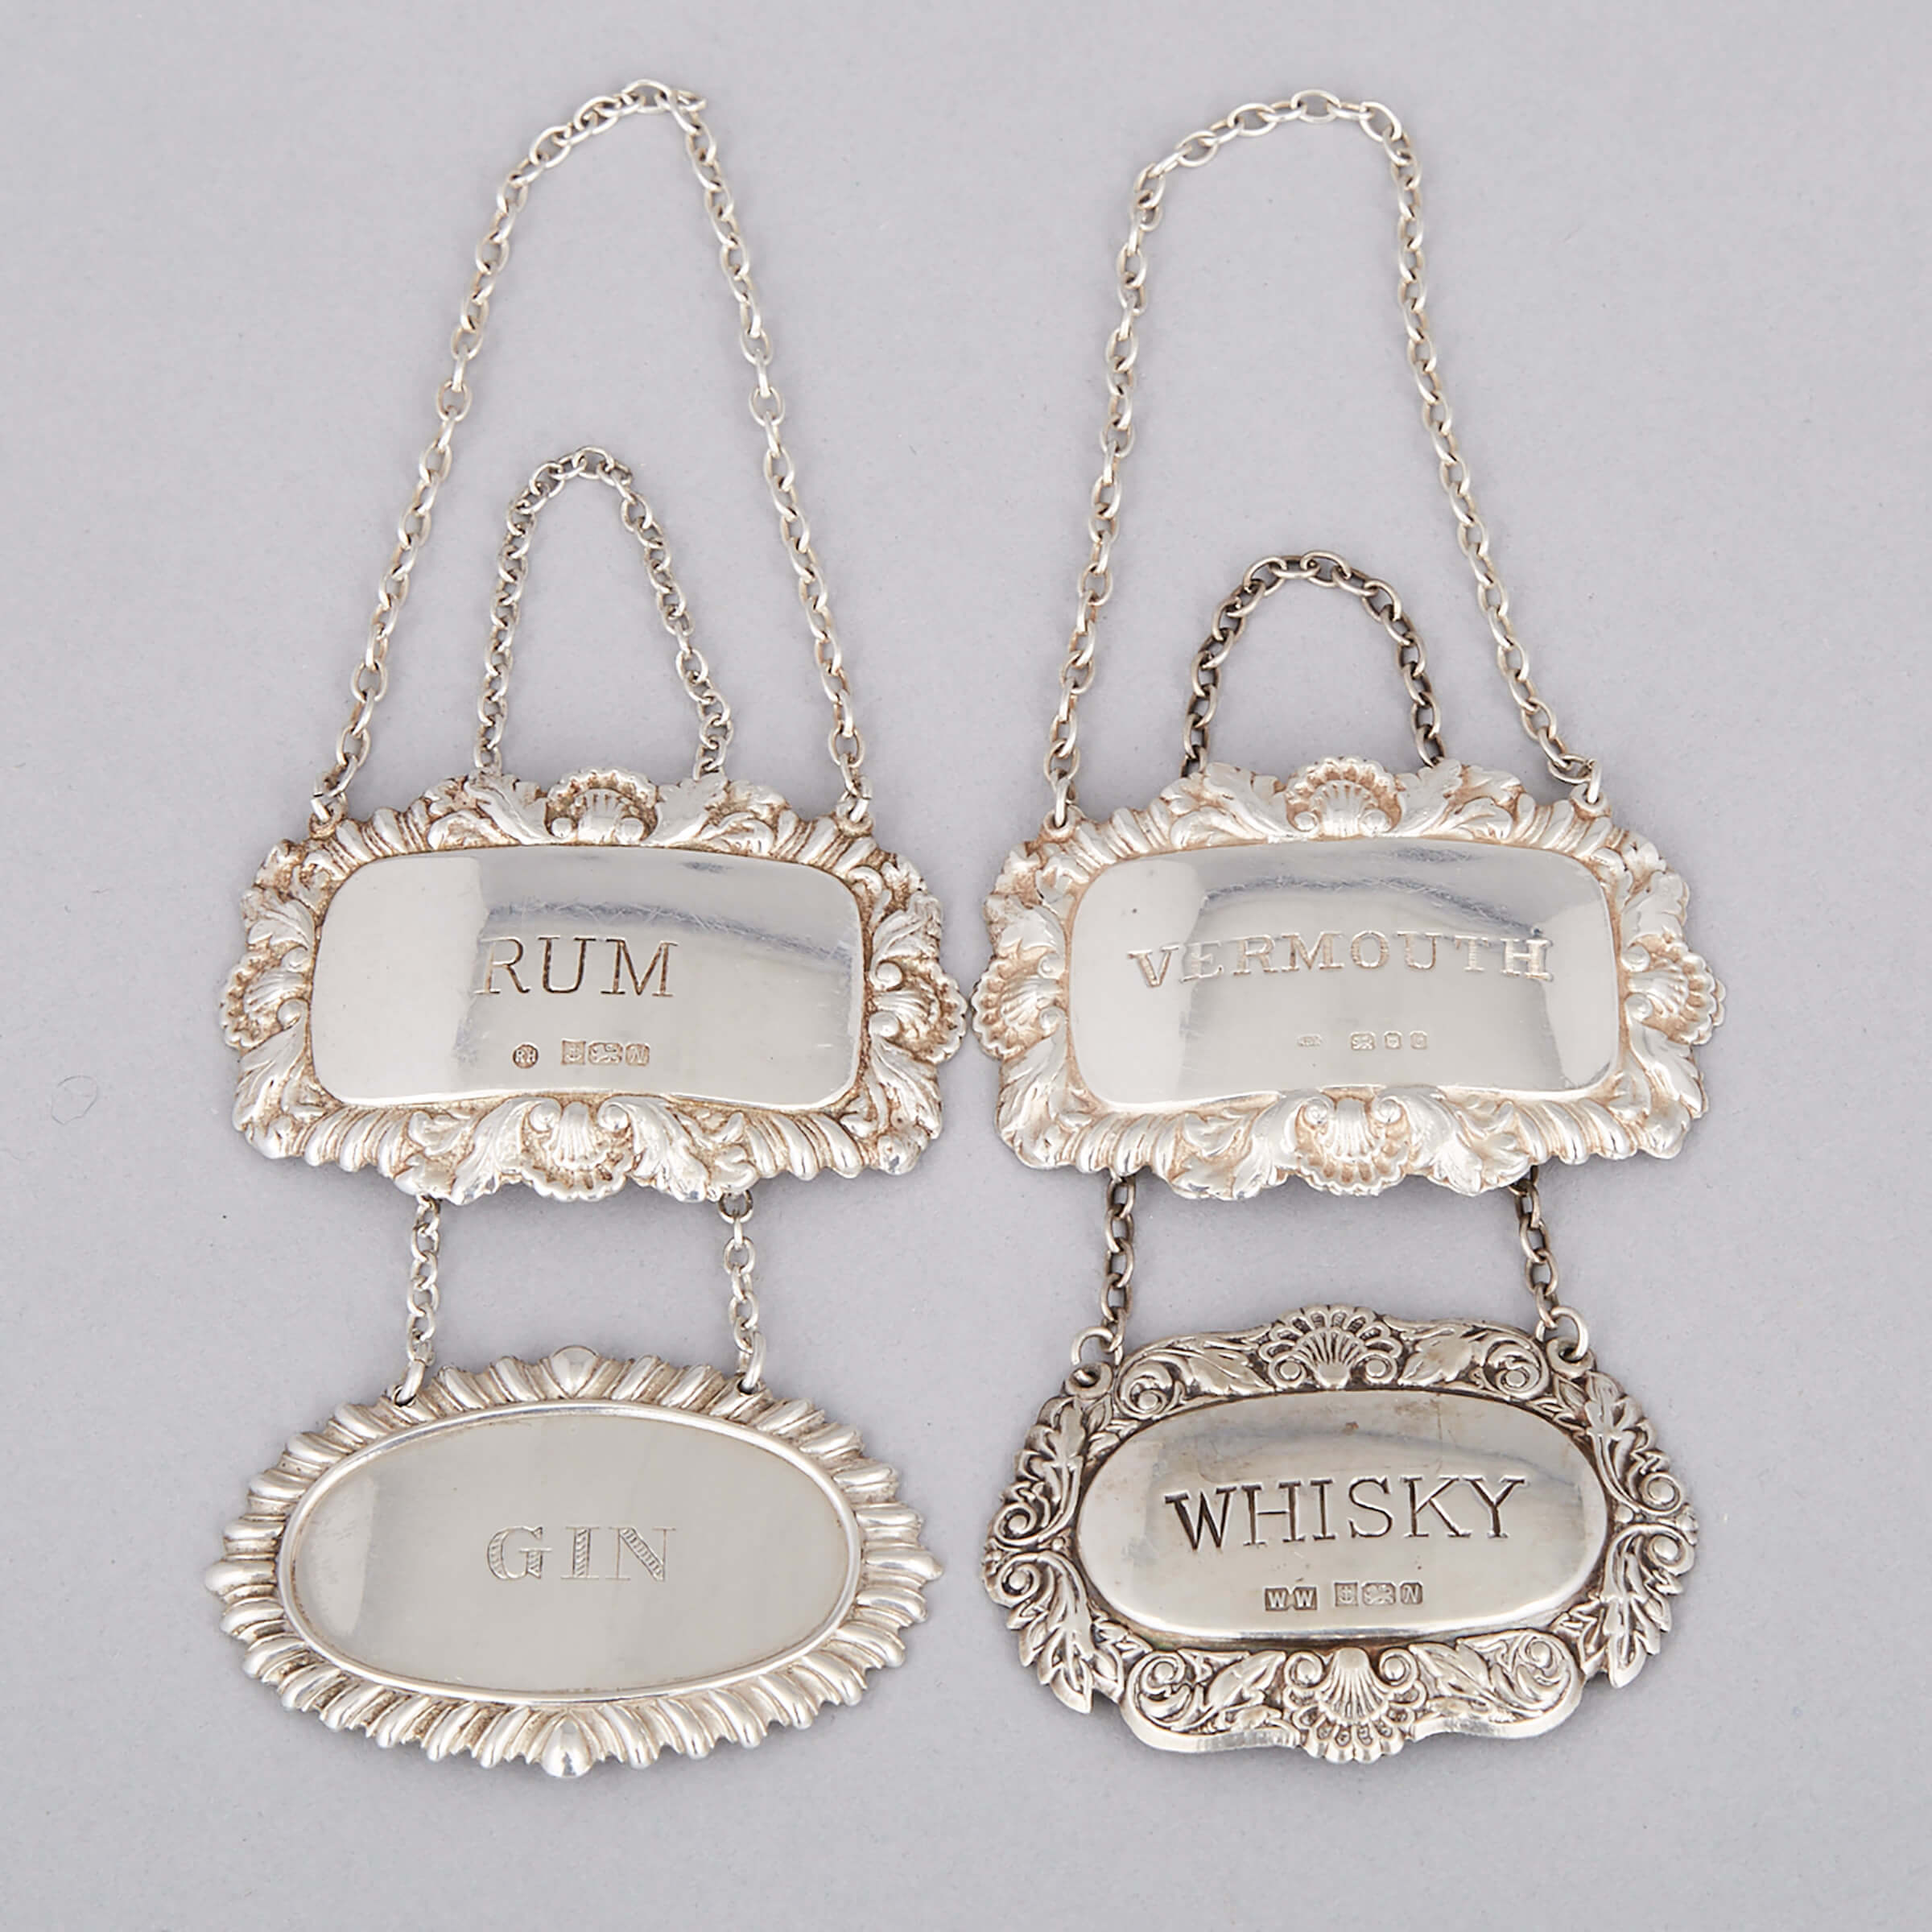 Four English and North American Silver Wine and Spirit Lables, 20th century